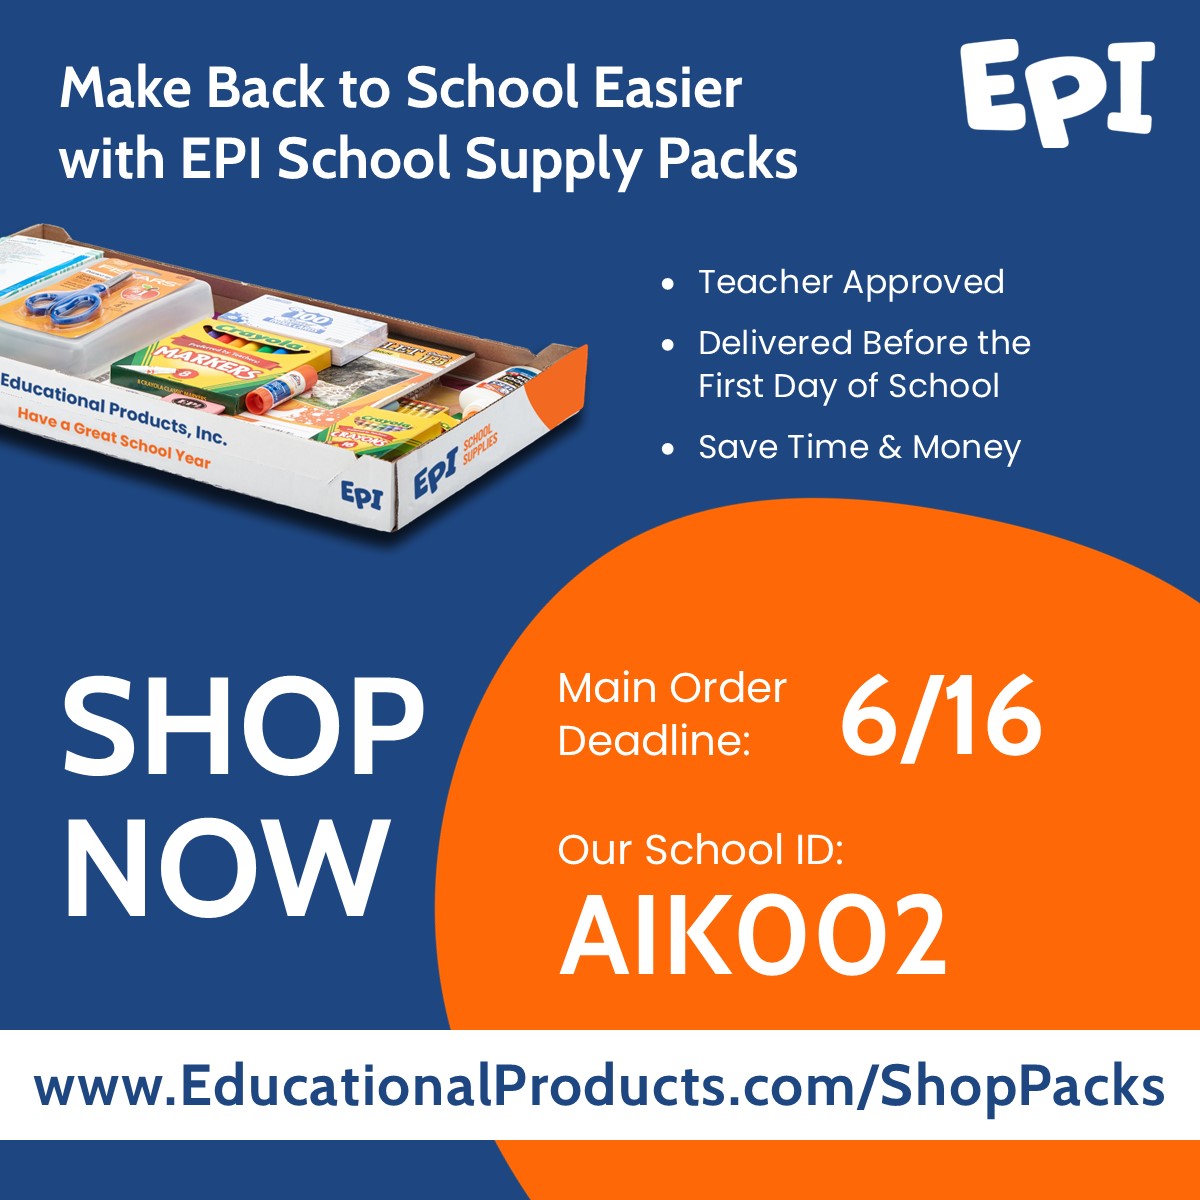 Order school supplies by June 16 by going to www.EducationalProducts.com/ShopPacks and use the code AIK002